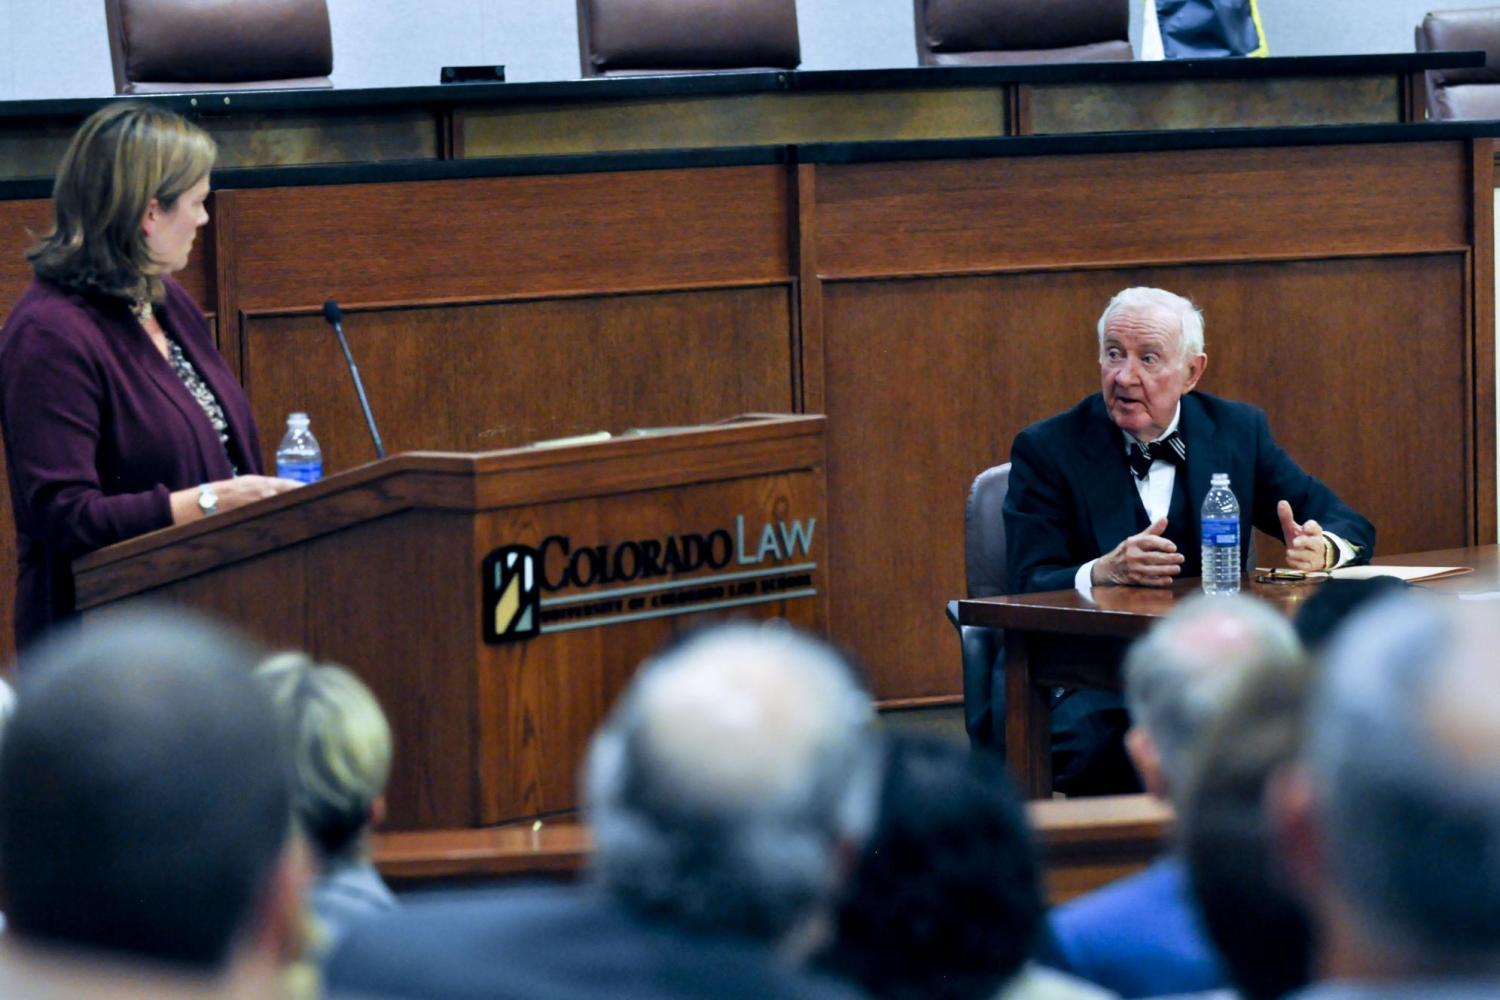 Inaugural Lecture with Justice John Paul Stevens